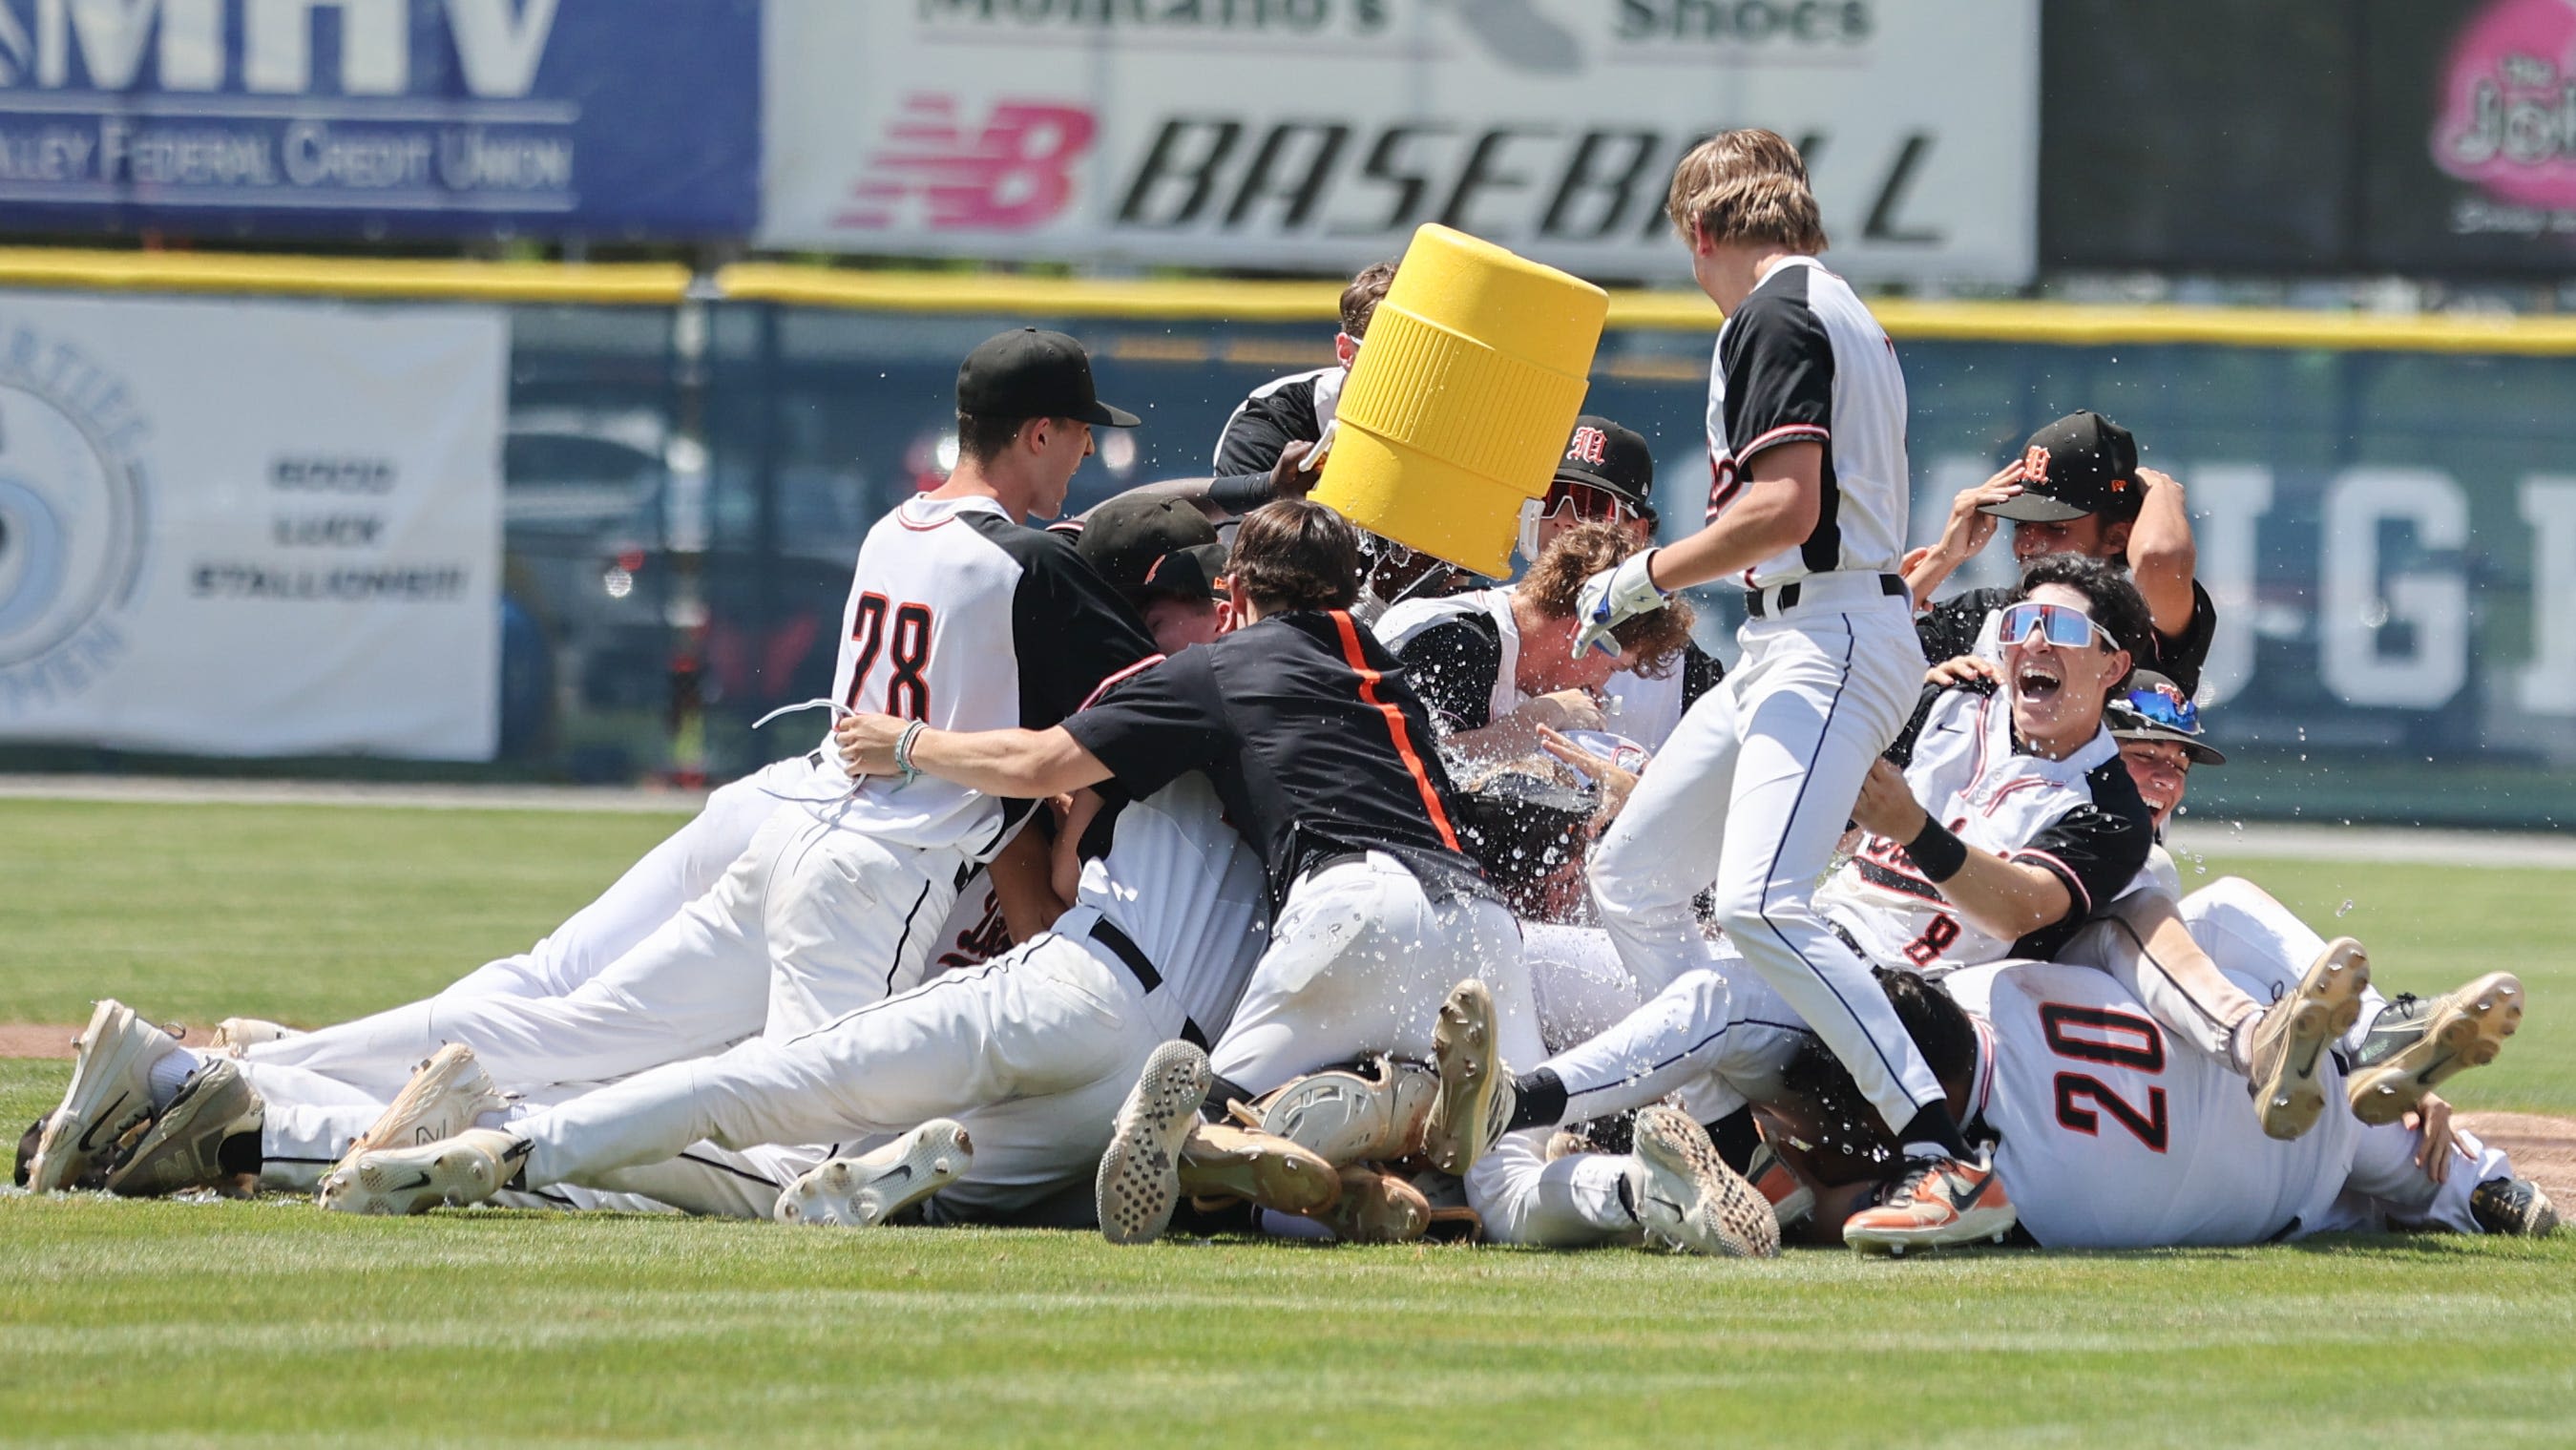 Photos: Marlboro wins Section 9 Class A title in dramatic fashion